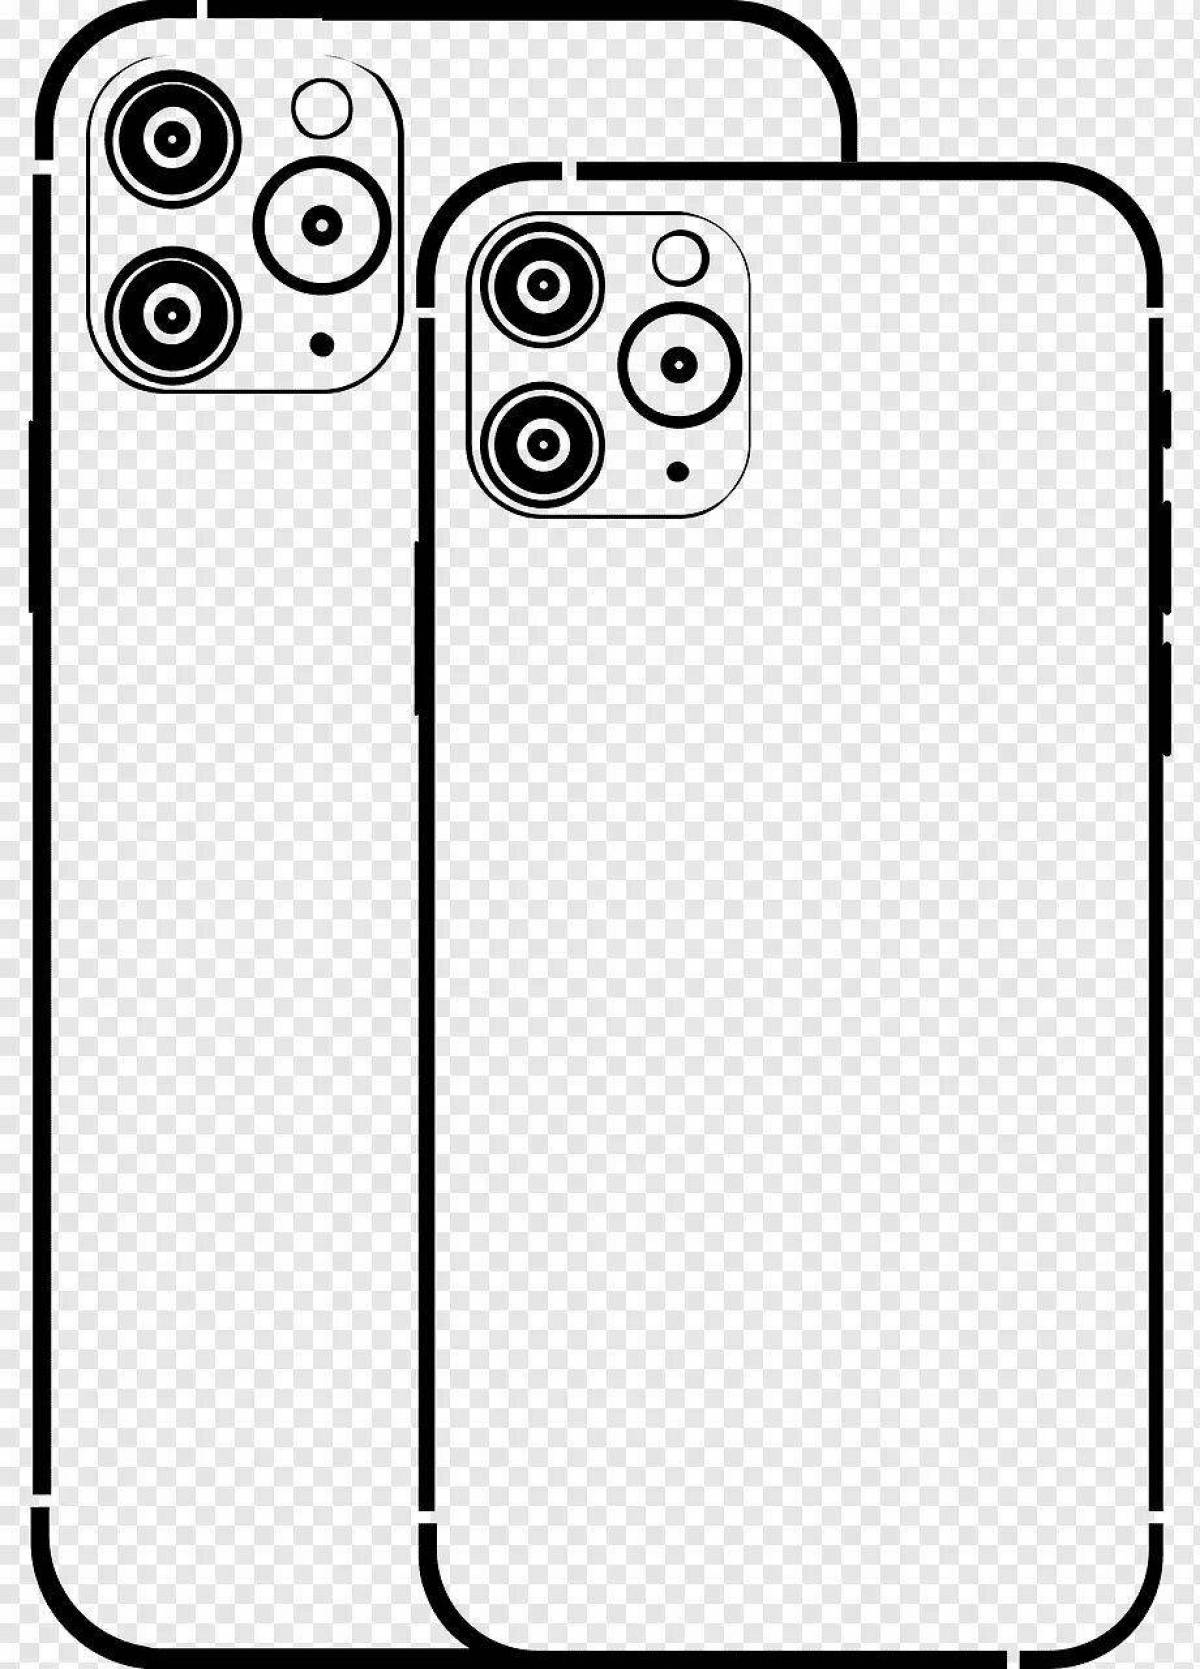 Cute iphone 11 coloring page